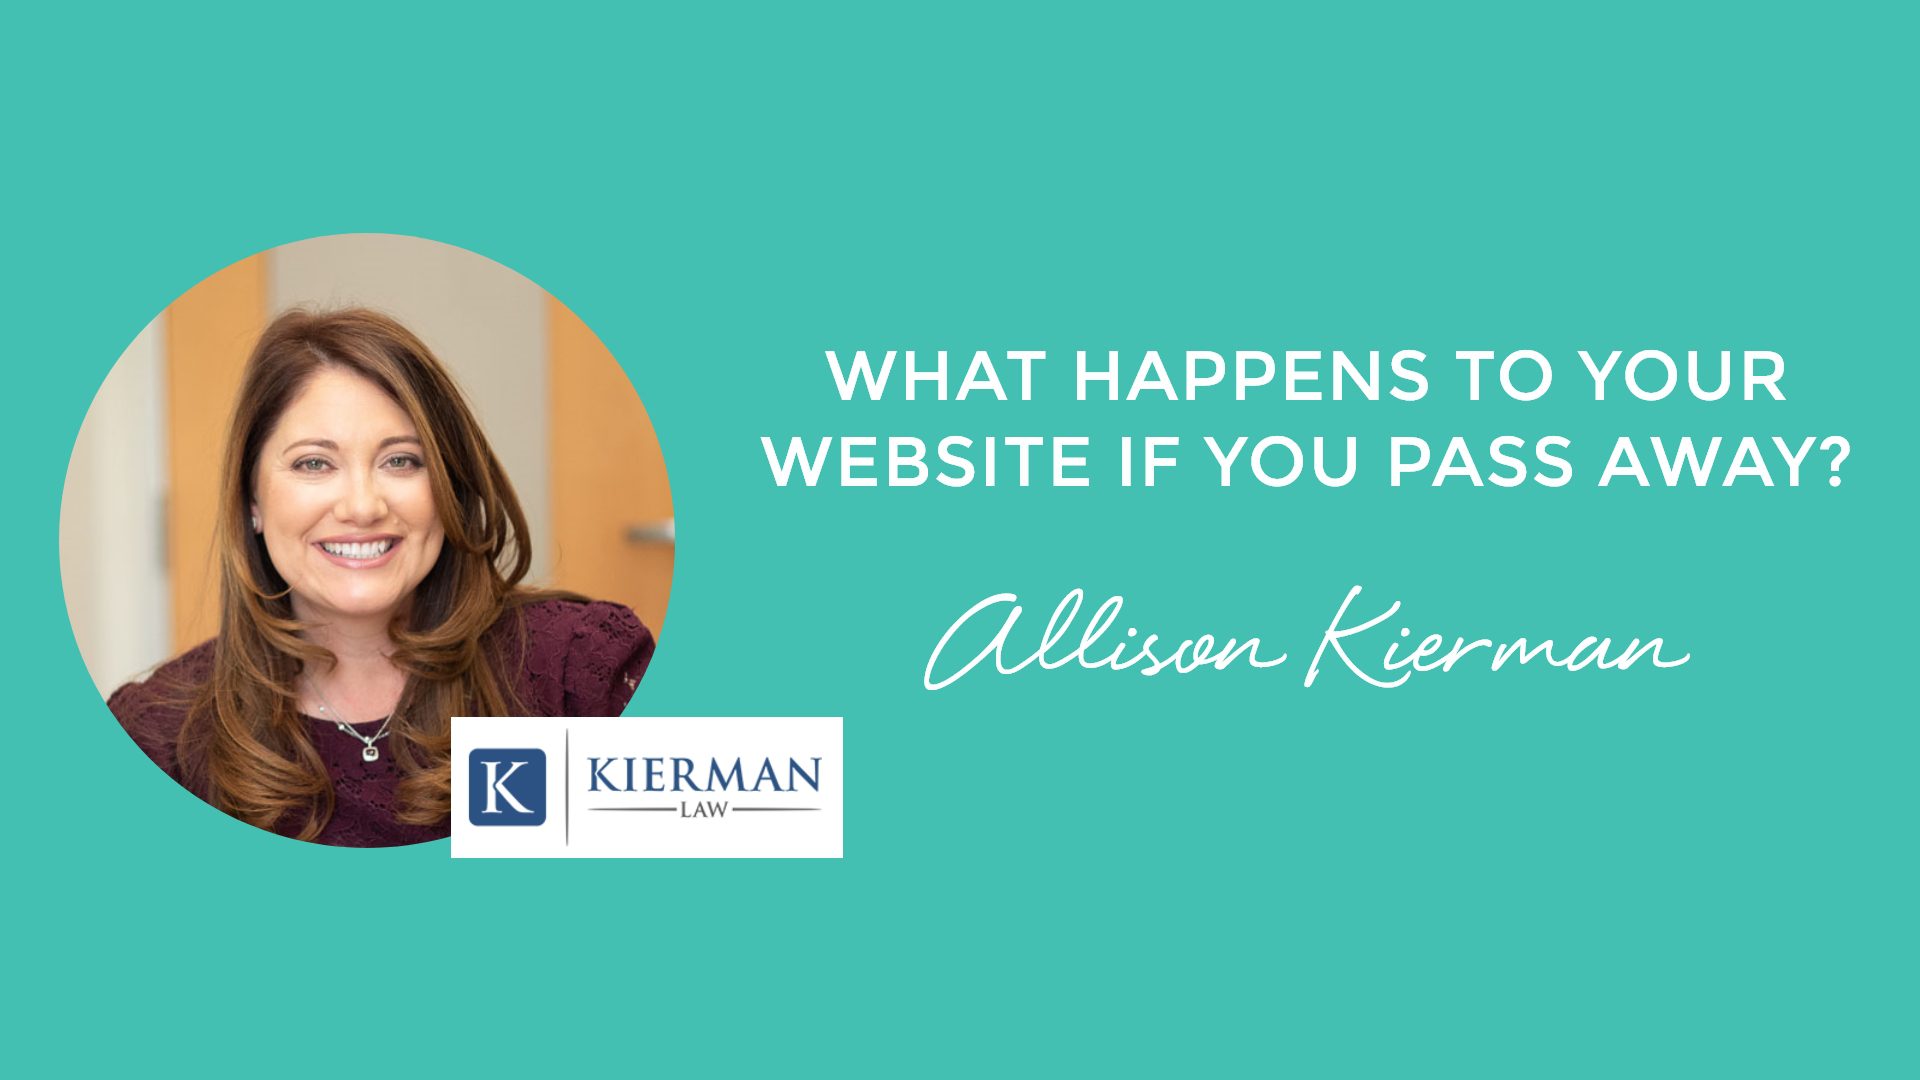 Allison Kierman Discusses What Happens to Your Website If You Pass Away